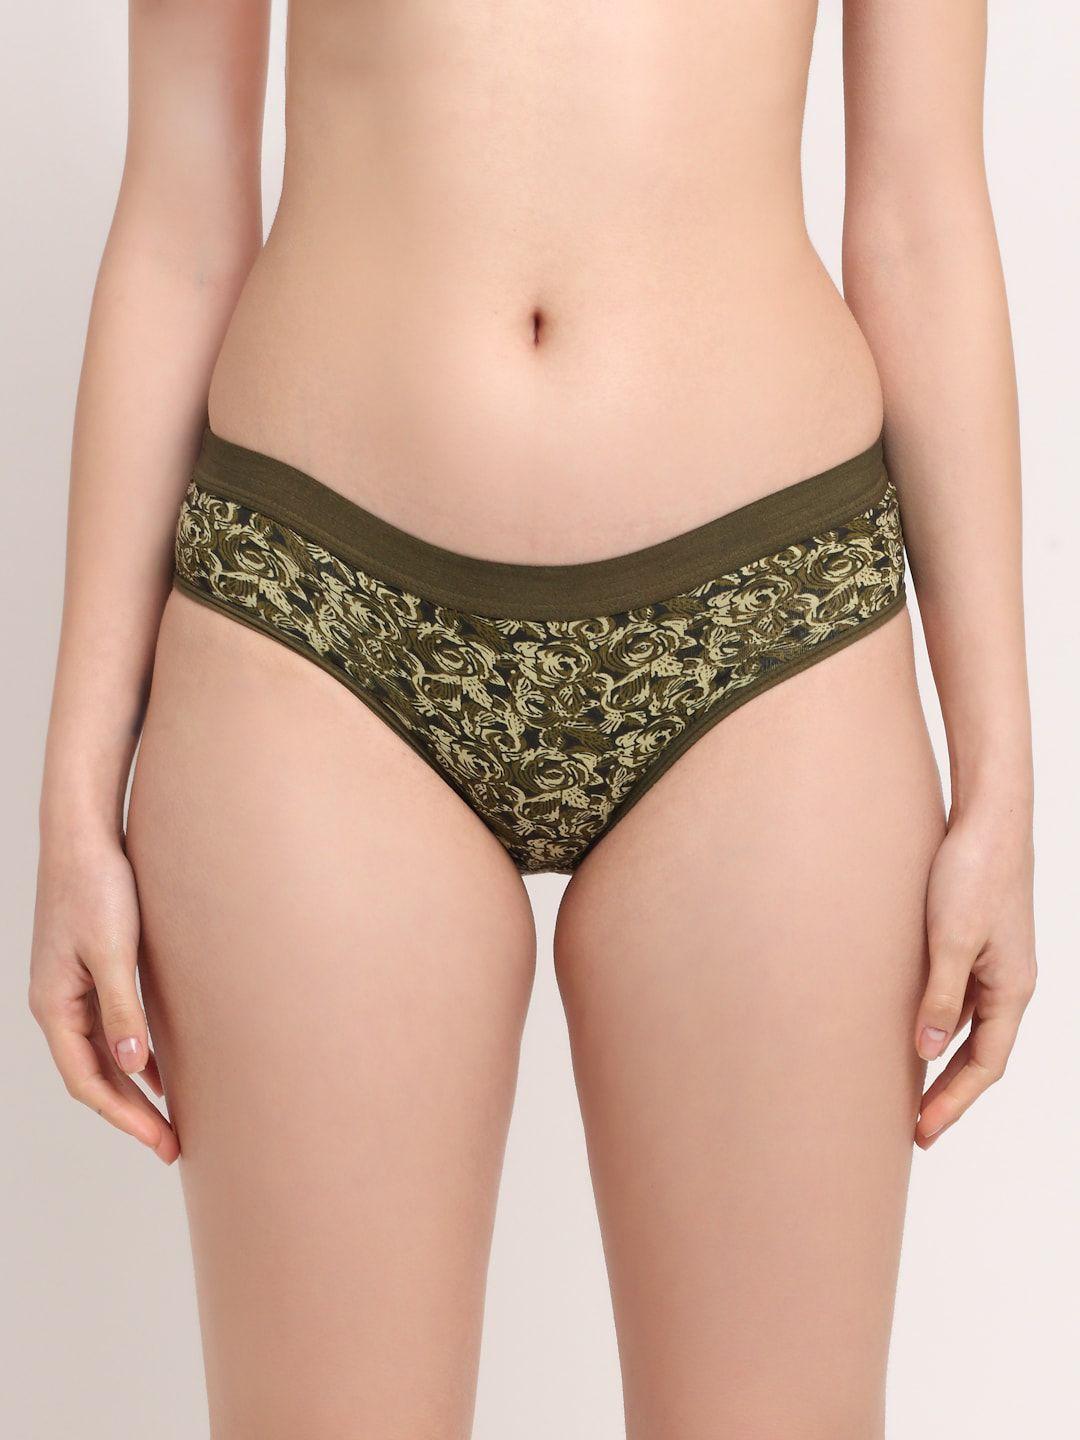 friskers-women-olive-green-floral-printed-premium-cotton-hipster-briefs-o-322-34